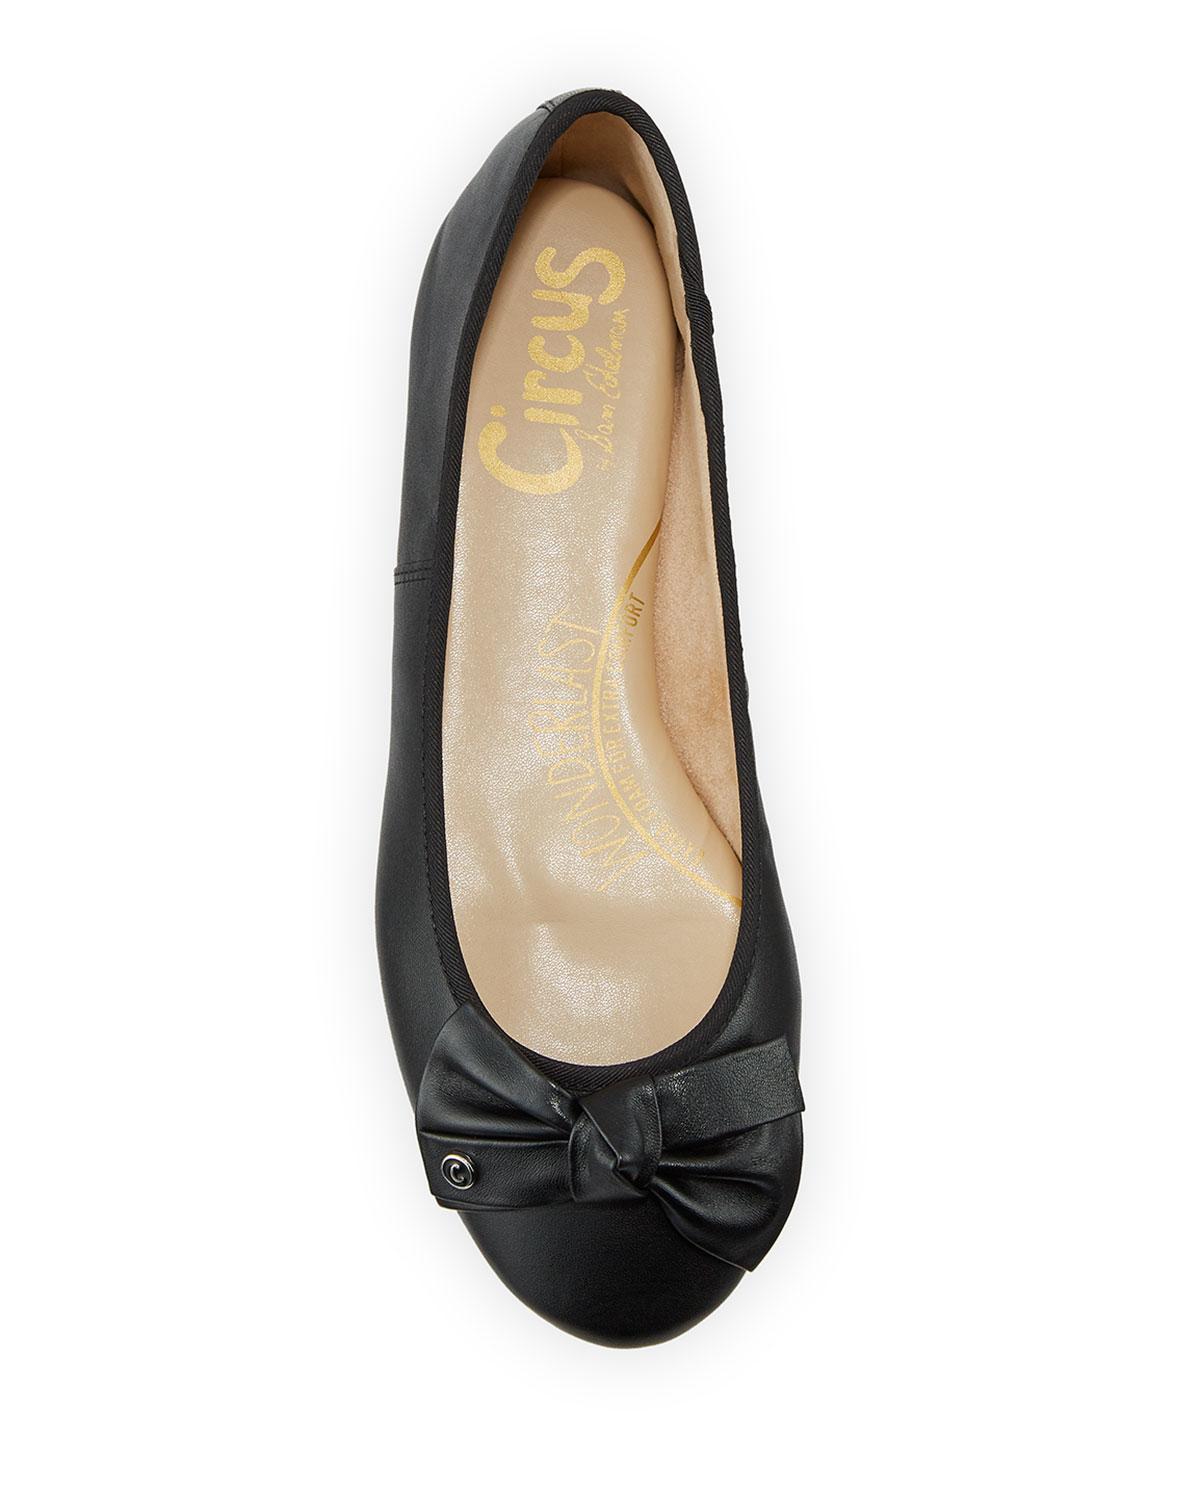 Circus by Sam Edelman Connie Leather Bow Flats in Black - Save 67% - Lyst